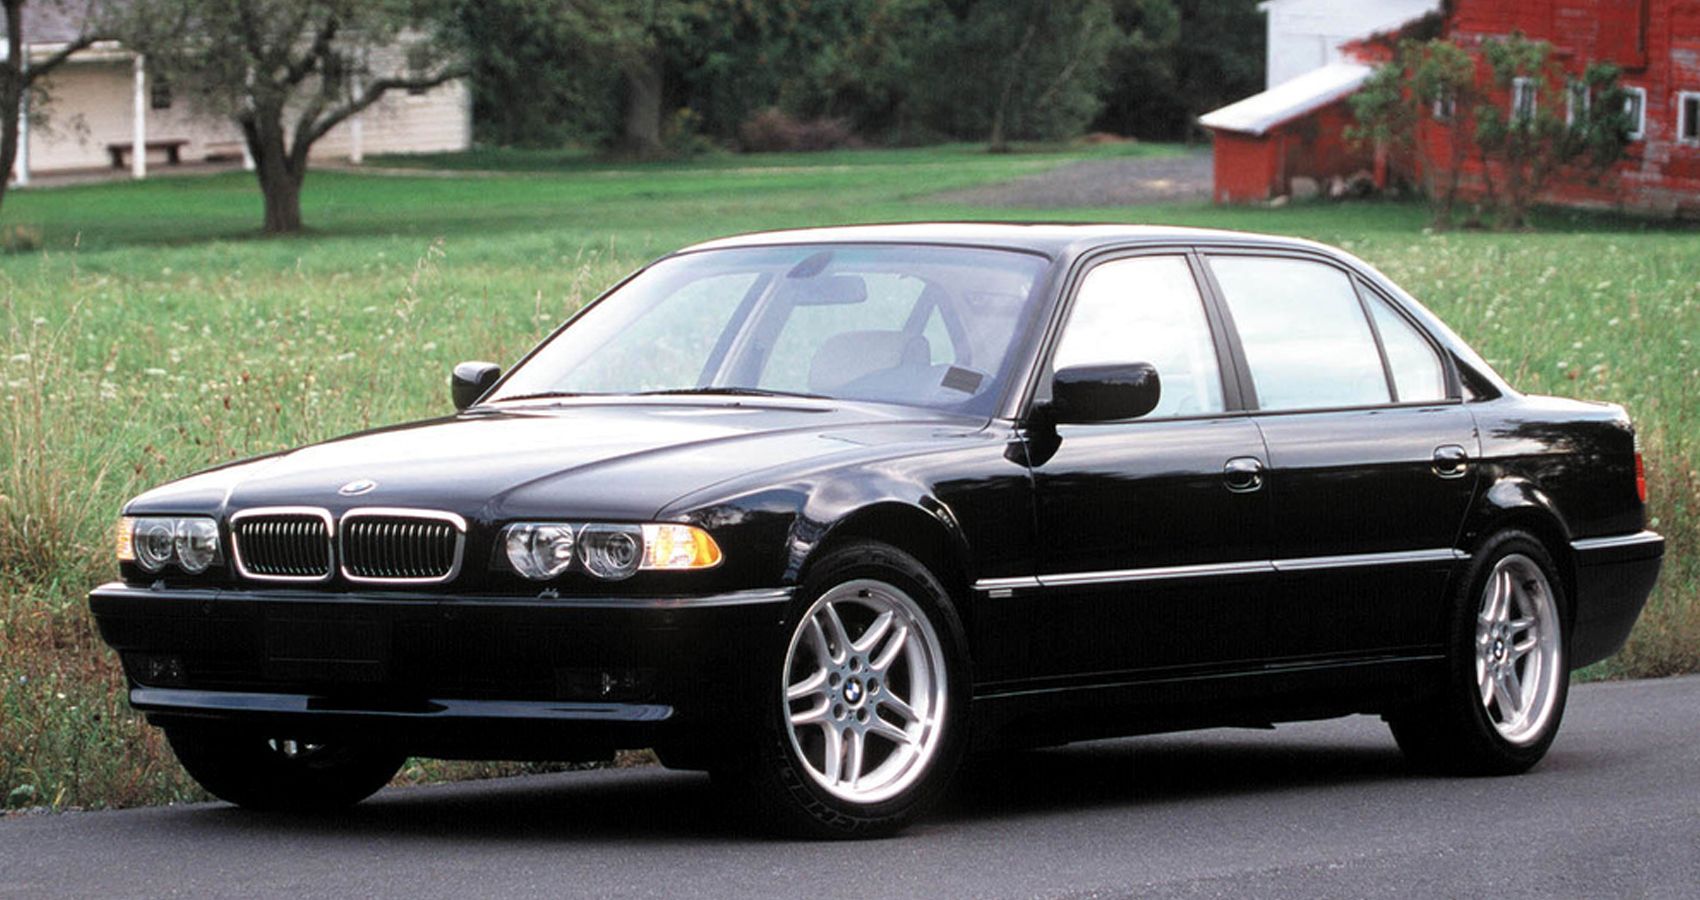 Front 3/4 view of a black E38 7-series